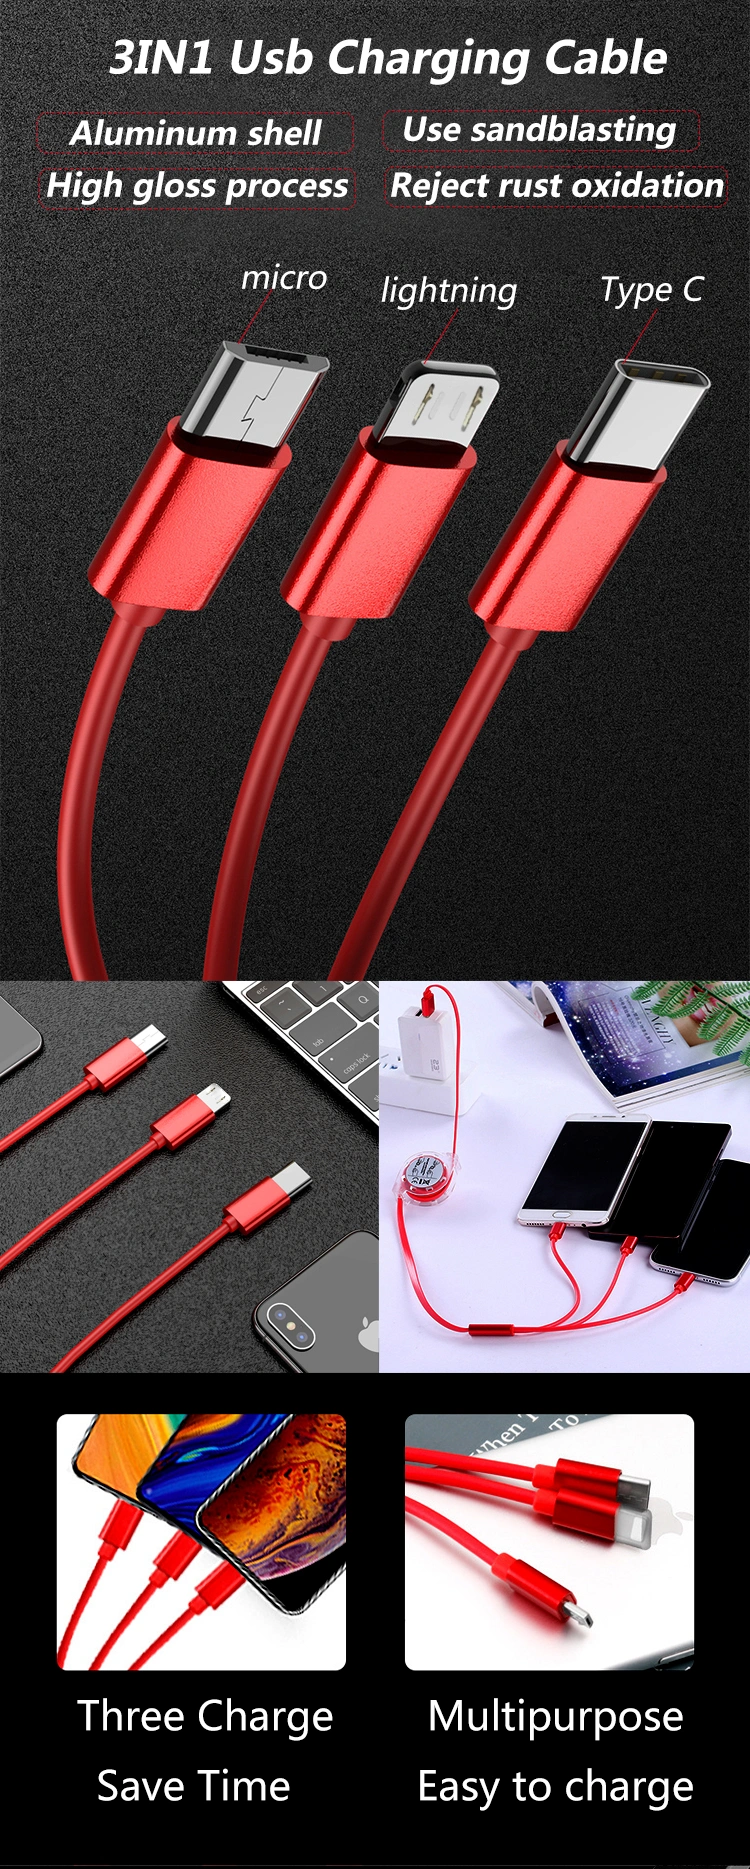 Stretch 3in1 Ios, Type C /USB C, Micro USB Charger Cable for iPhone 5 6 7 8 X Samsung Cord Wire Car Charge Mobile Phone Cables